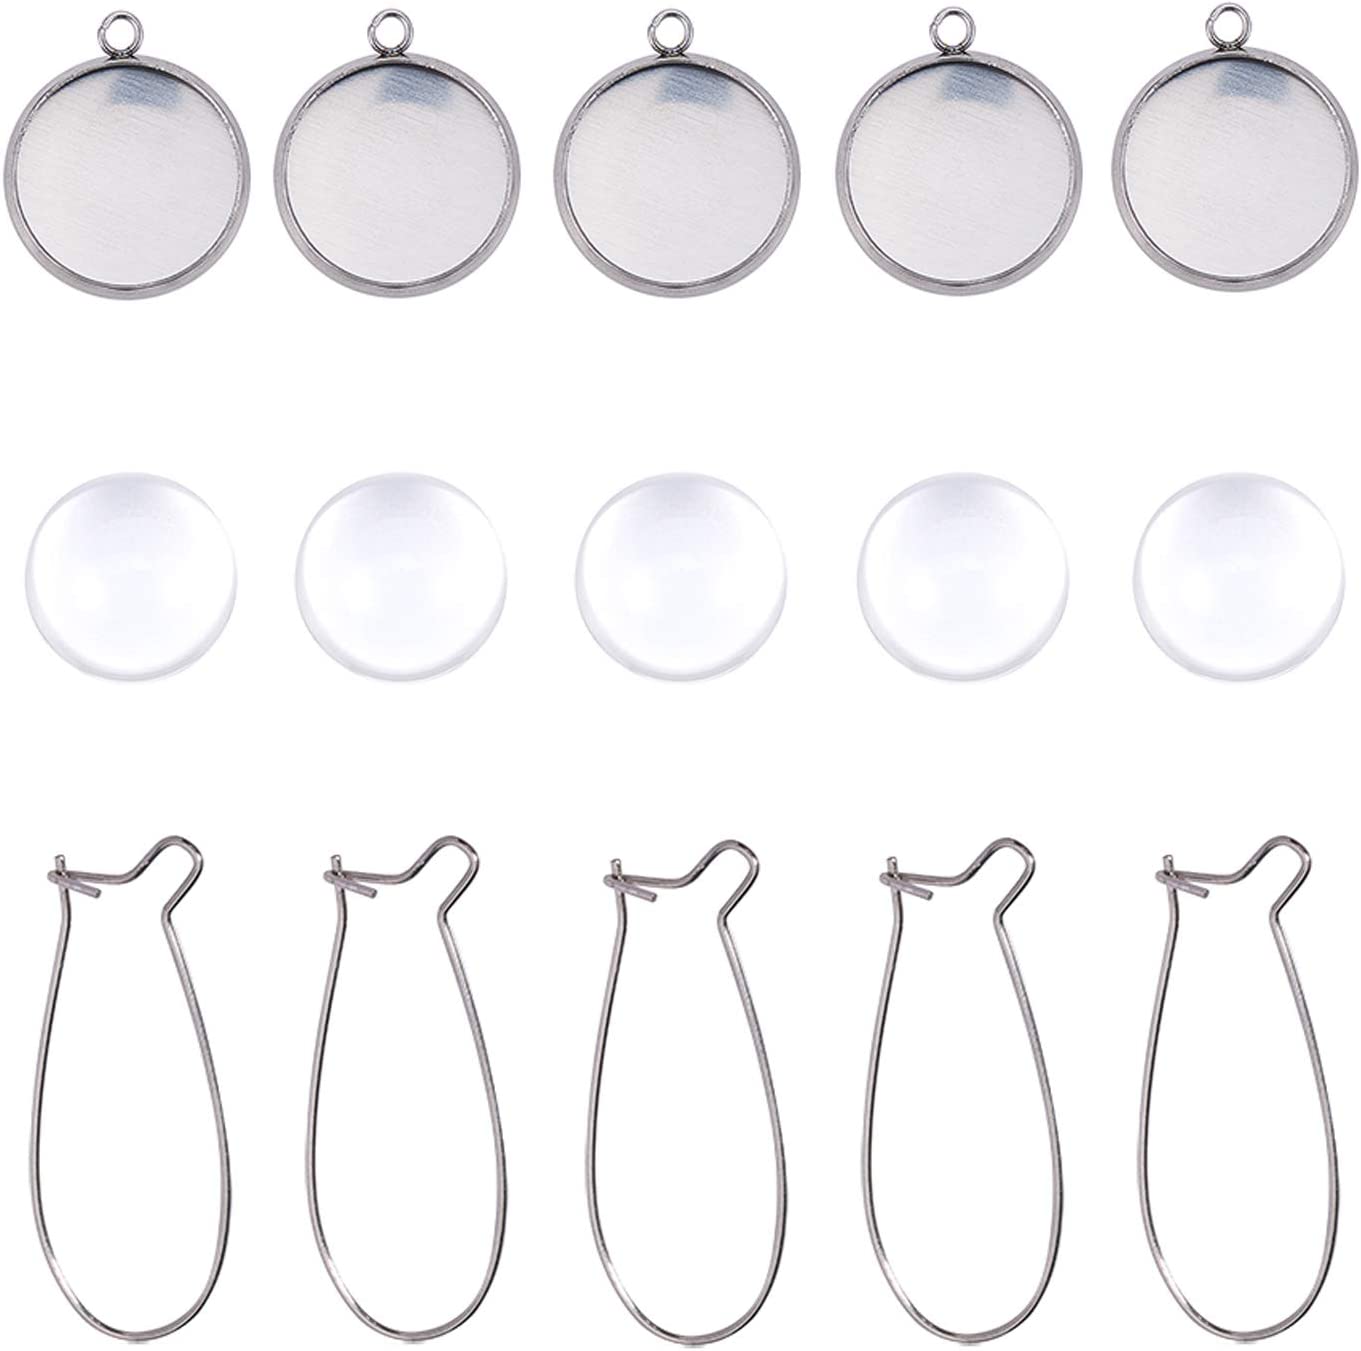 Stainless Steel Earring Hooks Settings, 80pcs Fish Hook Earrings, 80pcs Stainless Steel Pendants with 80pcs 12mm Transparent Glass Cabochons Cabochon for Earring Findings Making - image 1 of 15